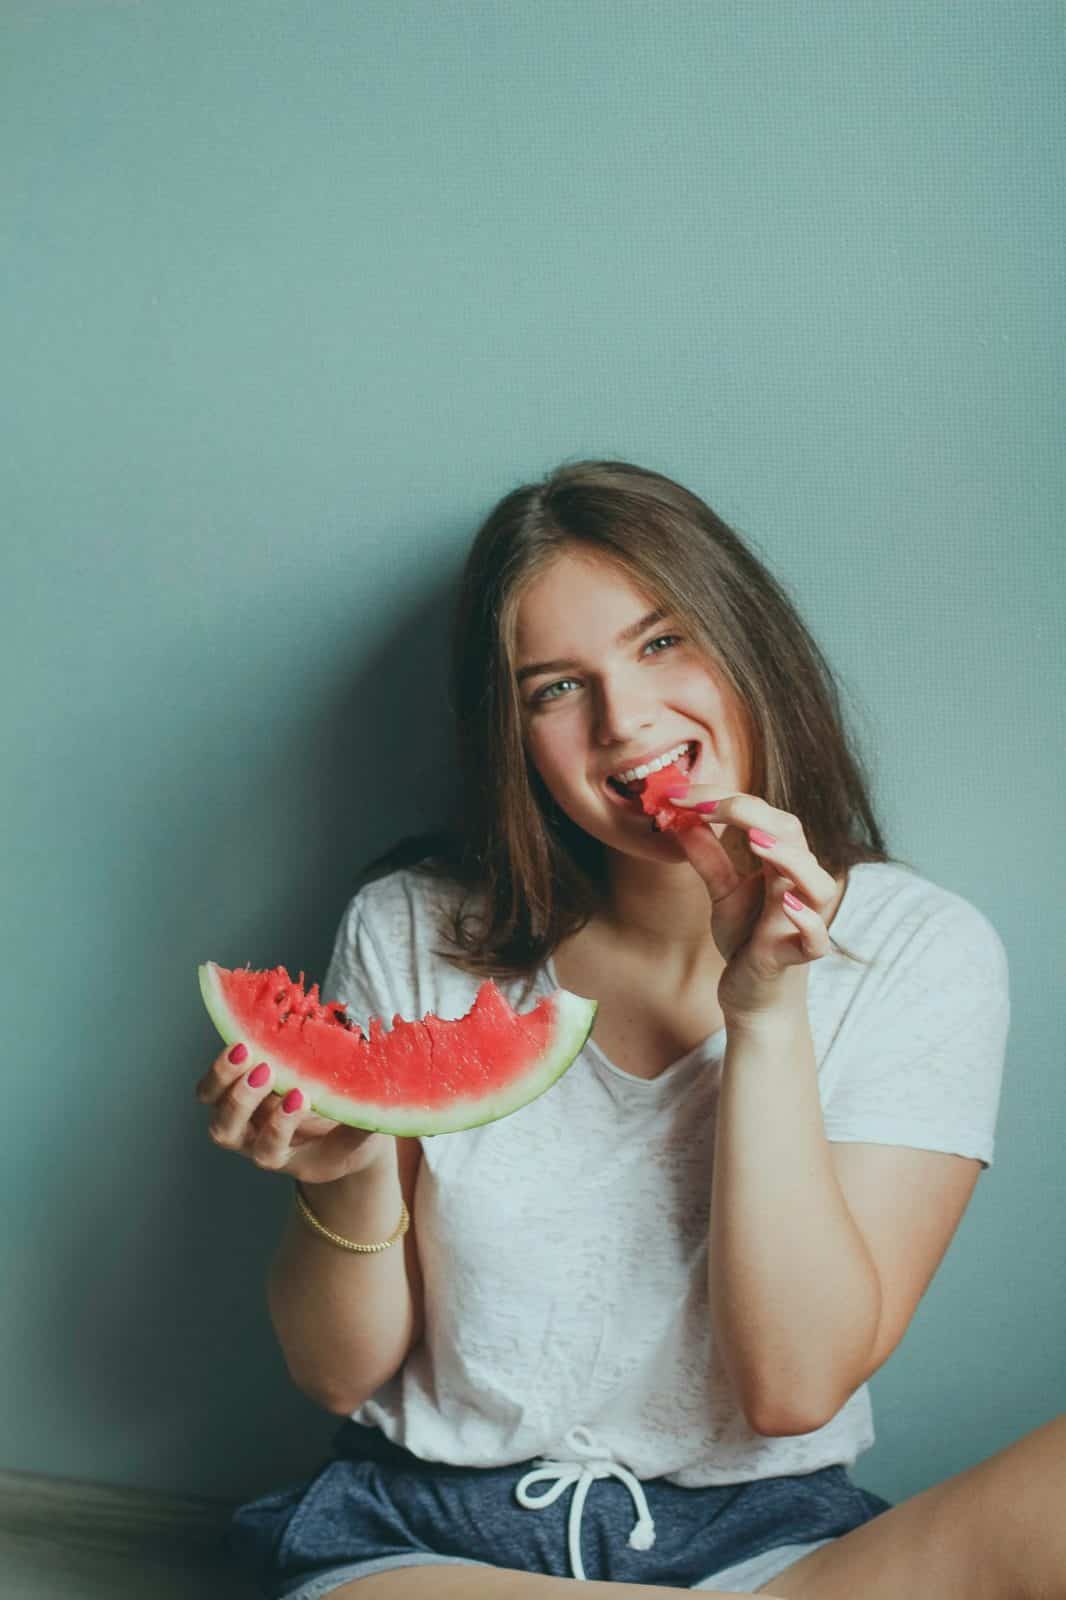 Benefits Of Eating Watermelon For Health, Skin and Hair